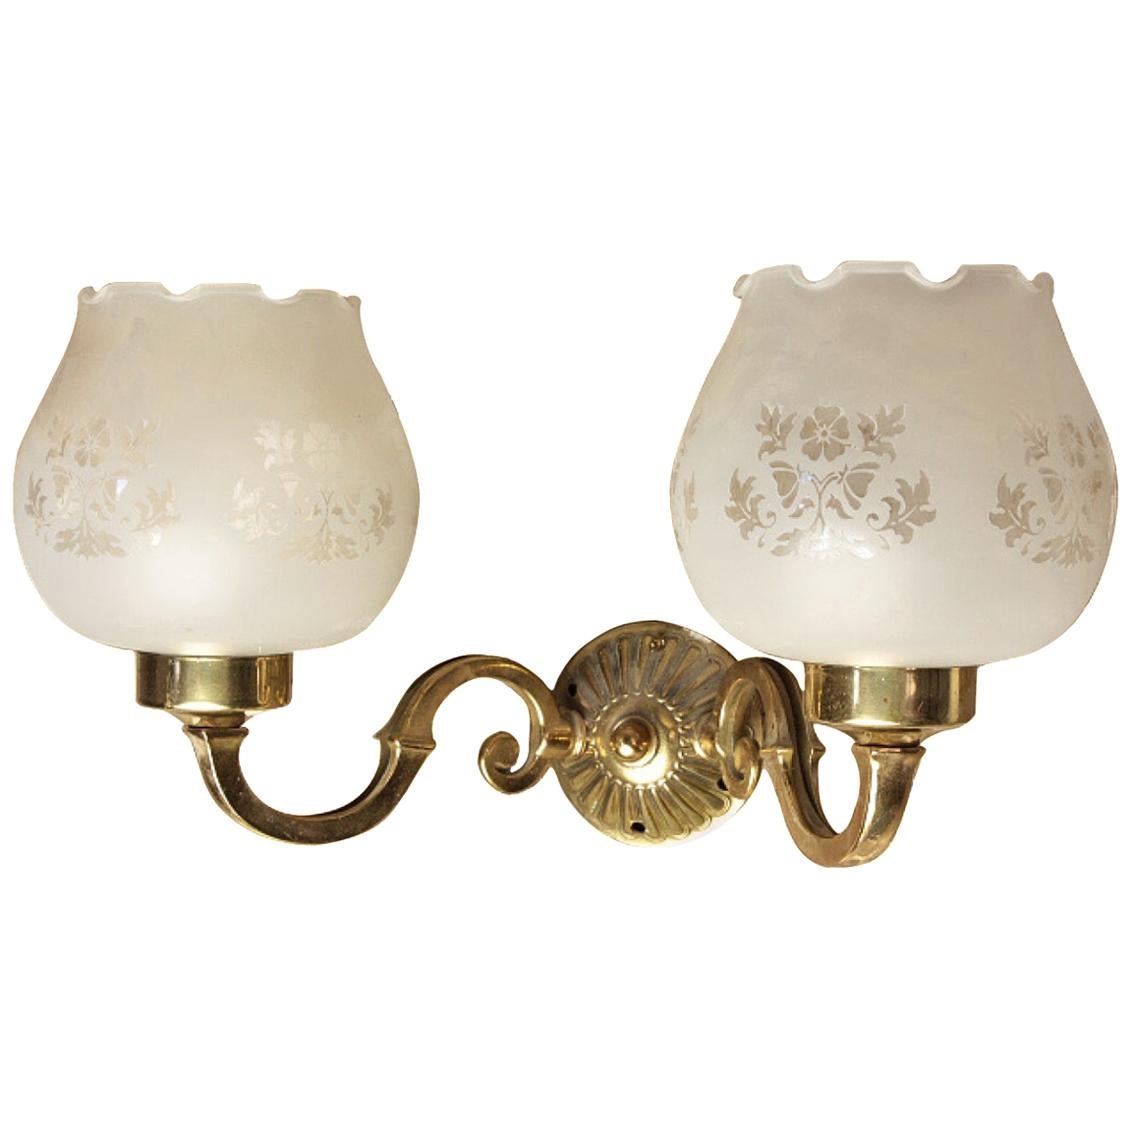 Scroll Arm Lights No Glass, 20th Century For Sale